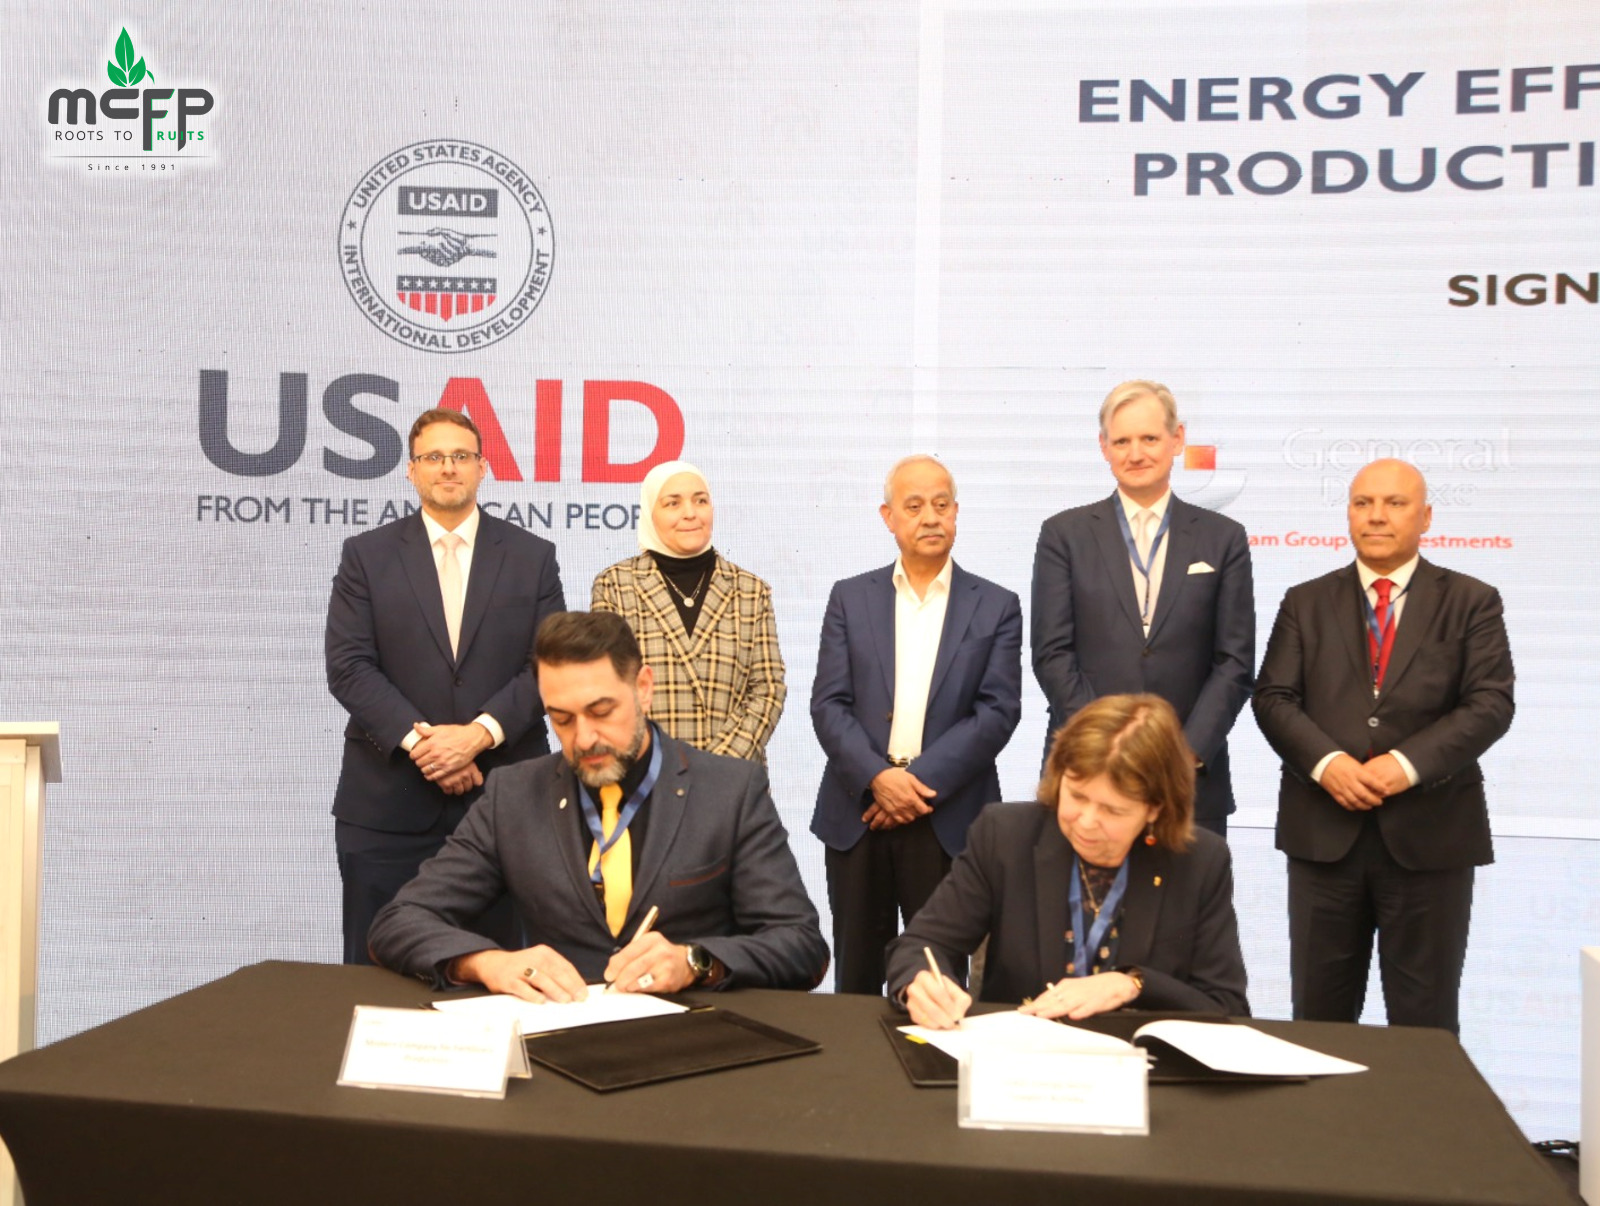 MCFP signs an agreement with the Energy Efficiency Program funded by USAID